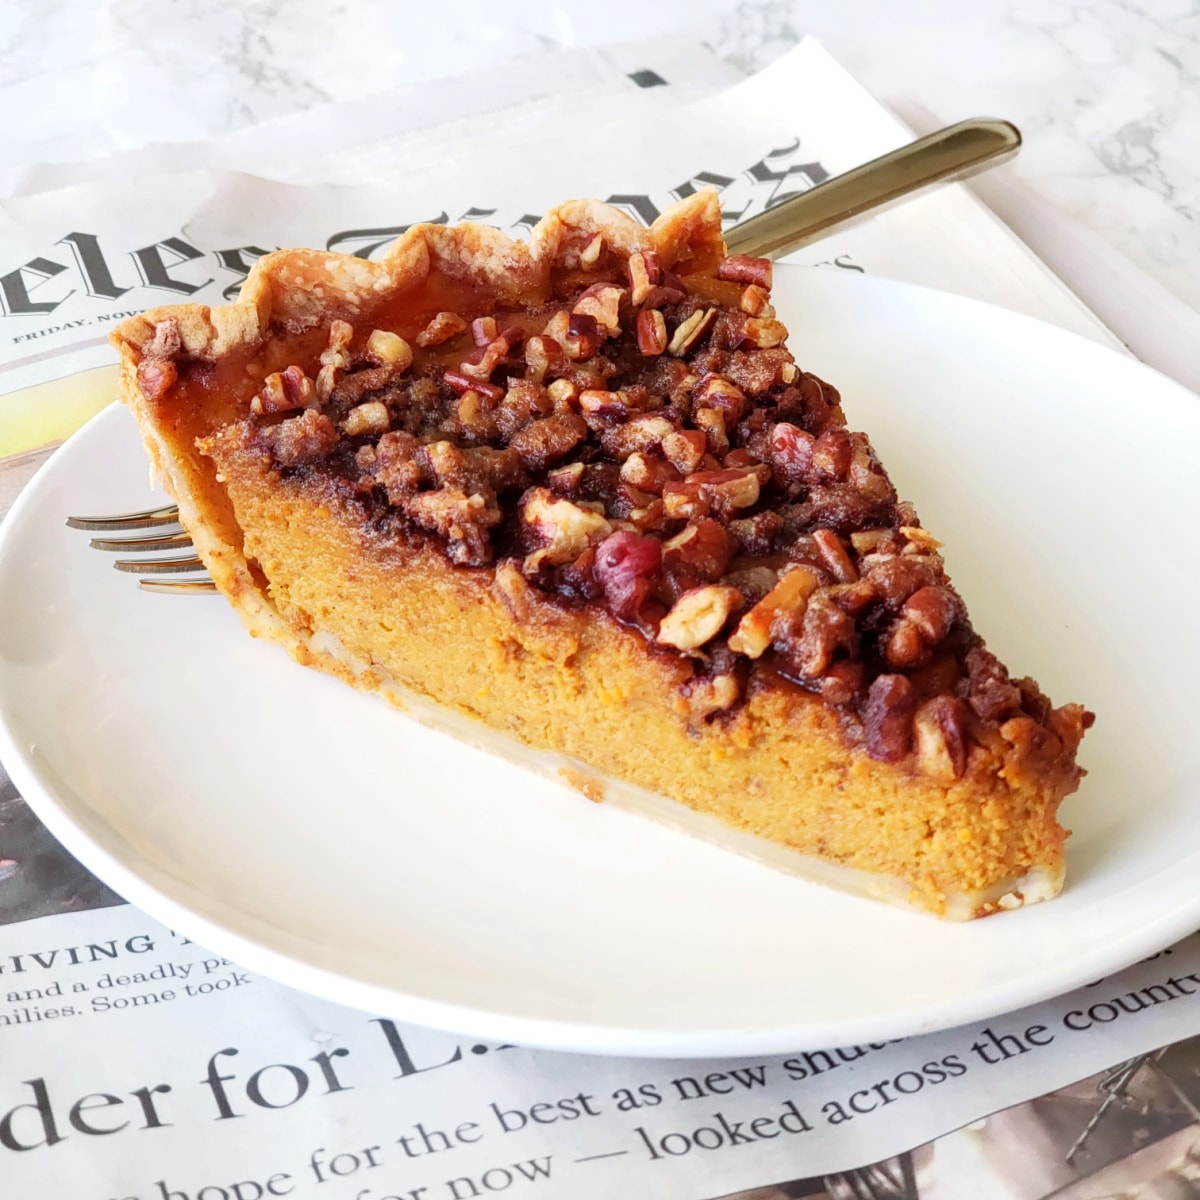 Slice of pumpkin Pie with nuts on top on a white plate with fork behind, sitting on a copy of the newspaper